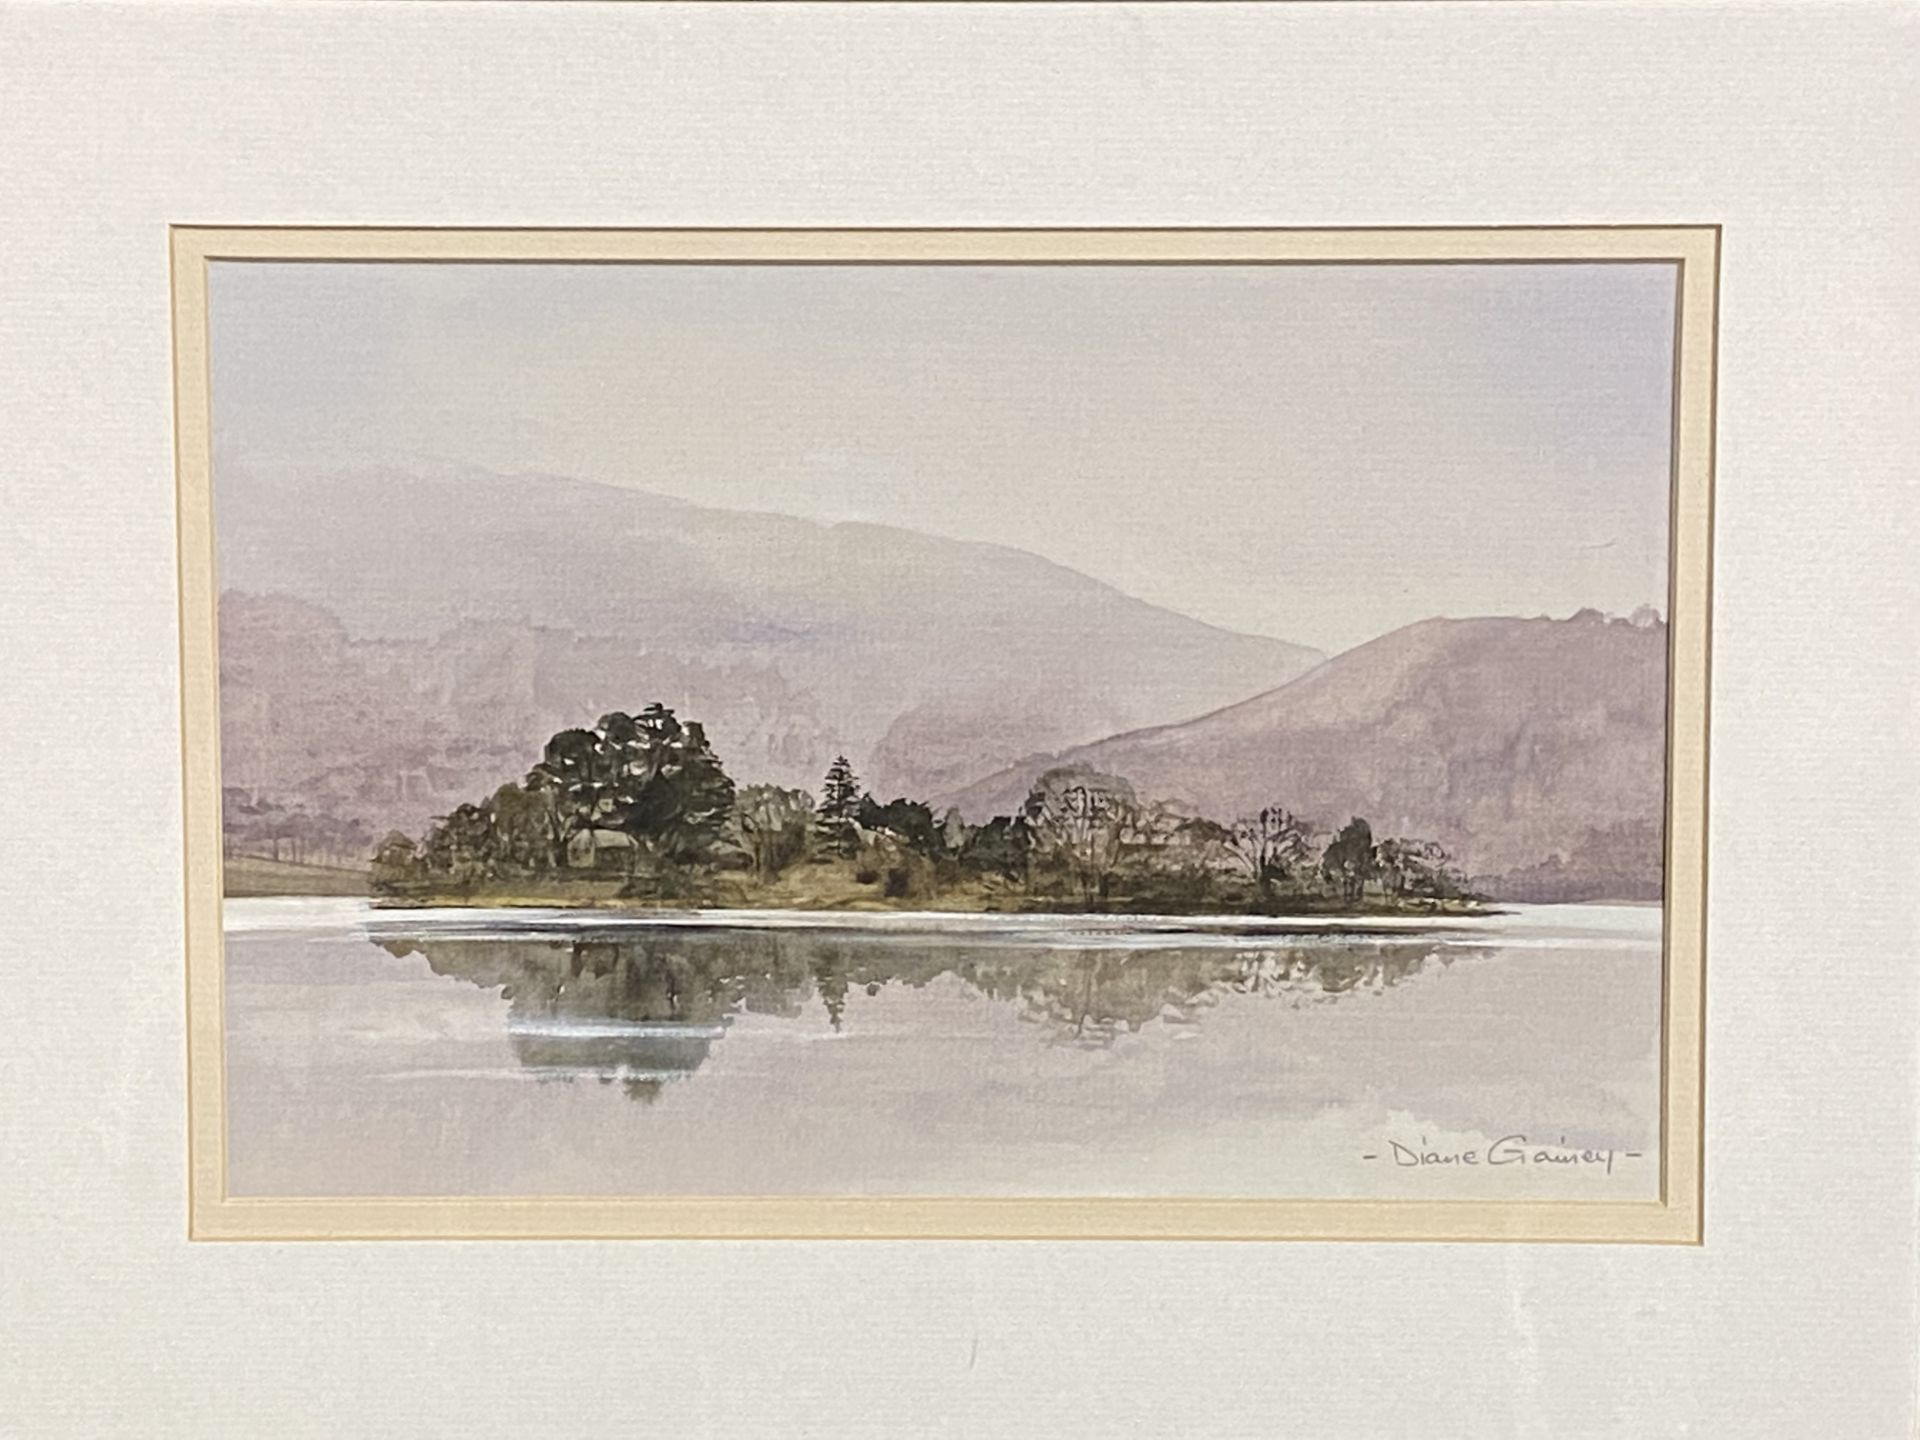 Framed and glazed watercolour of Grassmere by Diane Gainey - Image 2 of 4